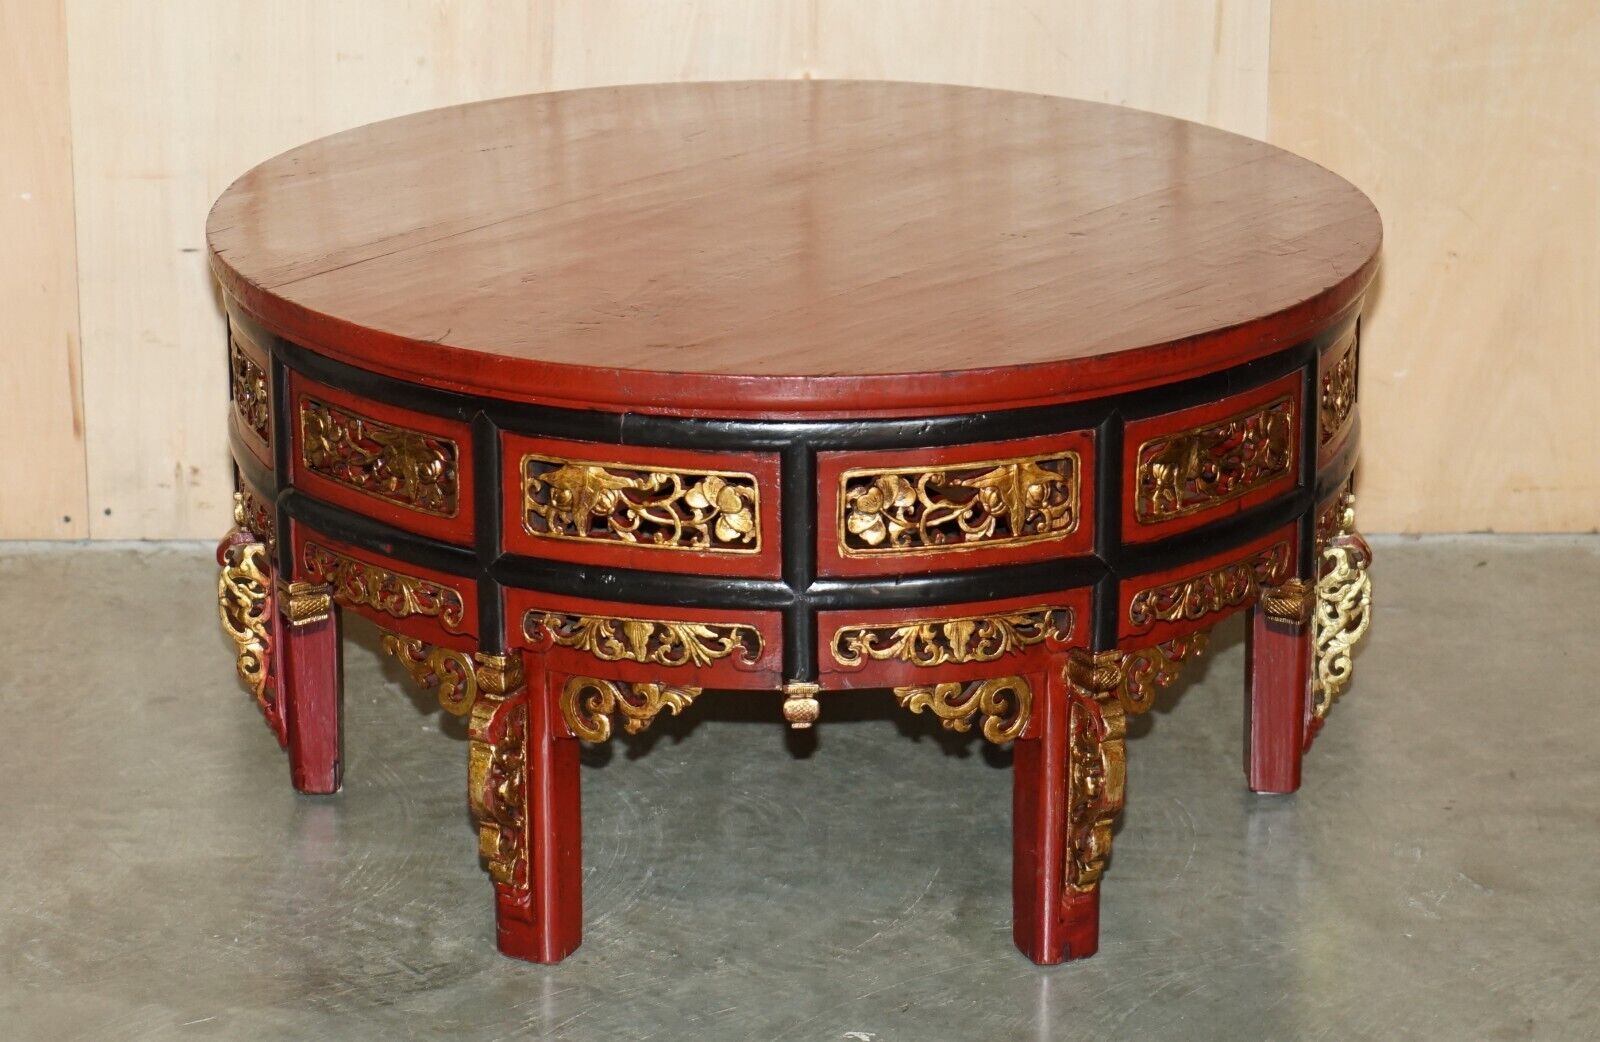 ANTIQUE CHINESE EXPORT ORNATE CARVED CHINOISERIE GOLD LEAF COFFEE COCKTAIL TABLE